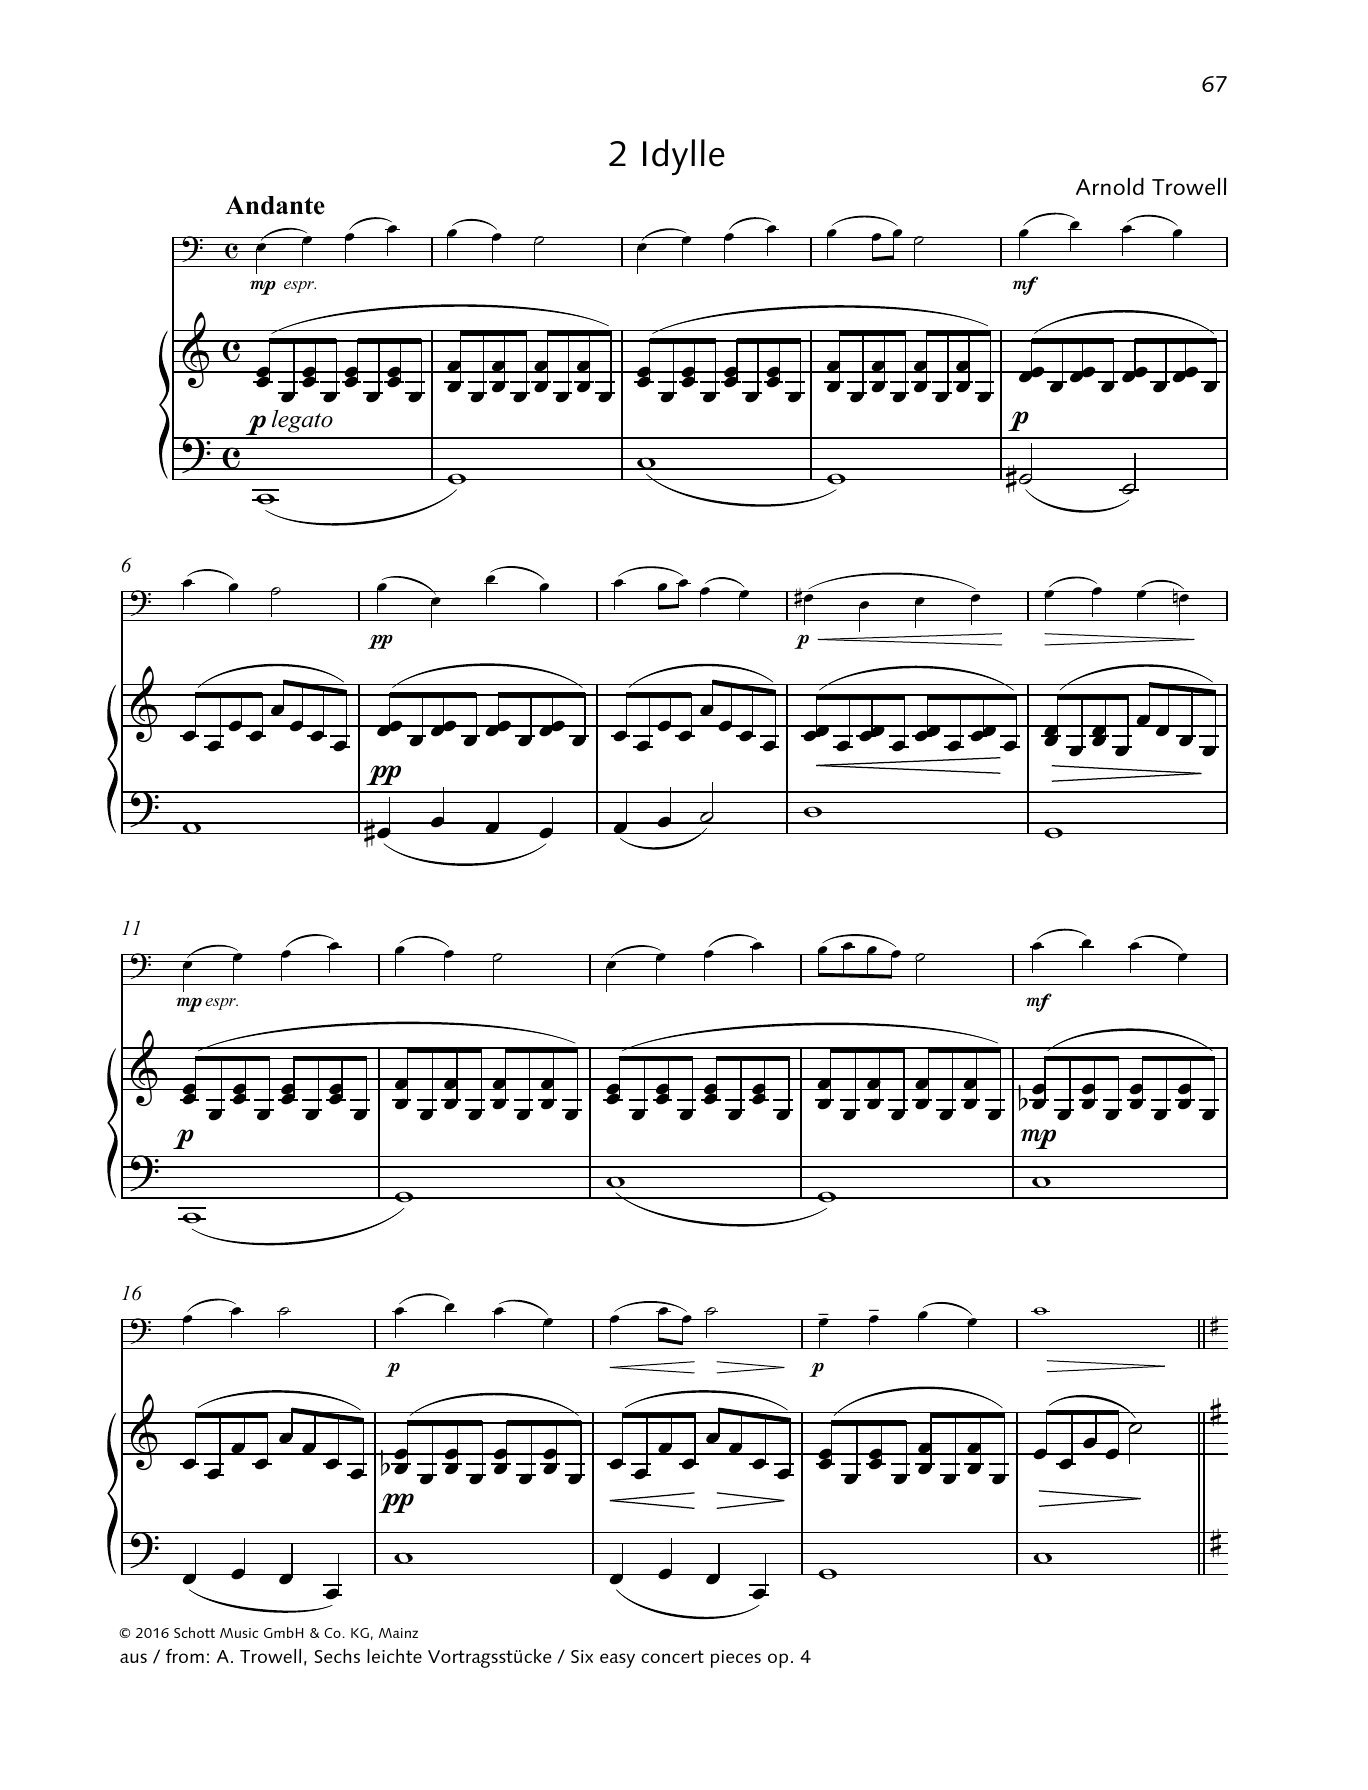 Download Arnold Trowell Idylle Sheet Music